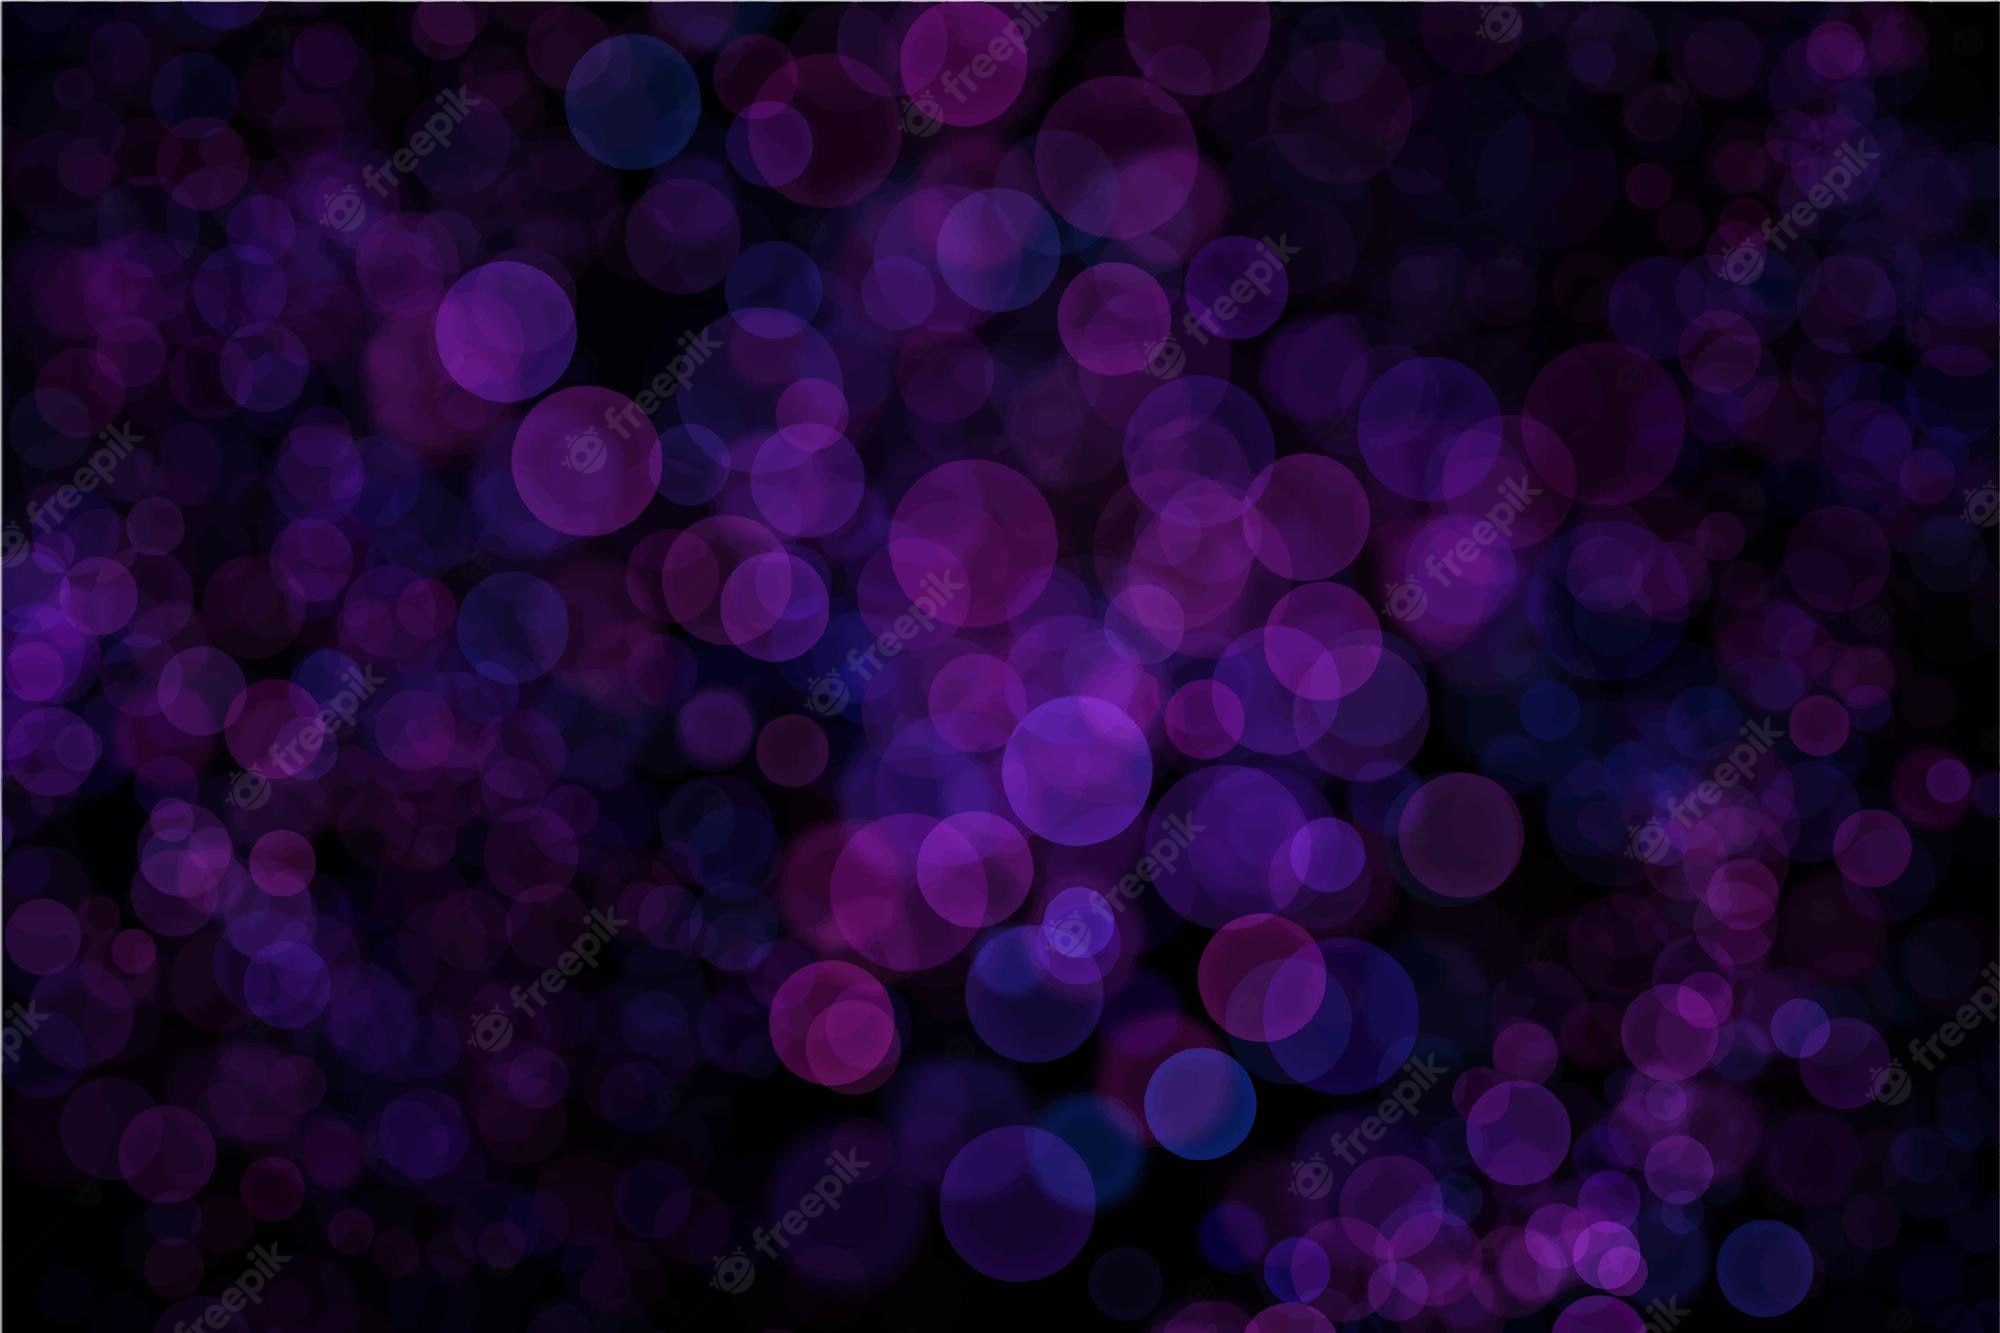 Abstract Gradient Purple Pink Blue Background Texture With Blurred Bokeh  Circles And Lights. Space For Your Design. Beautiful Backdrop. Stock Photo,  Picture and Royalty Free Image. Image 130131567.